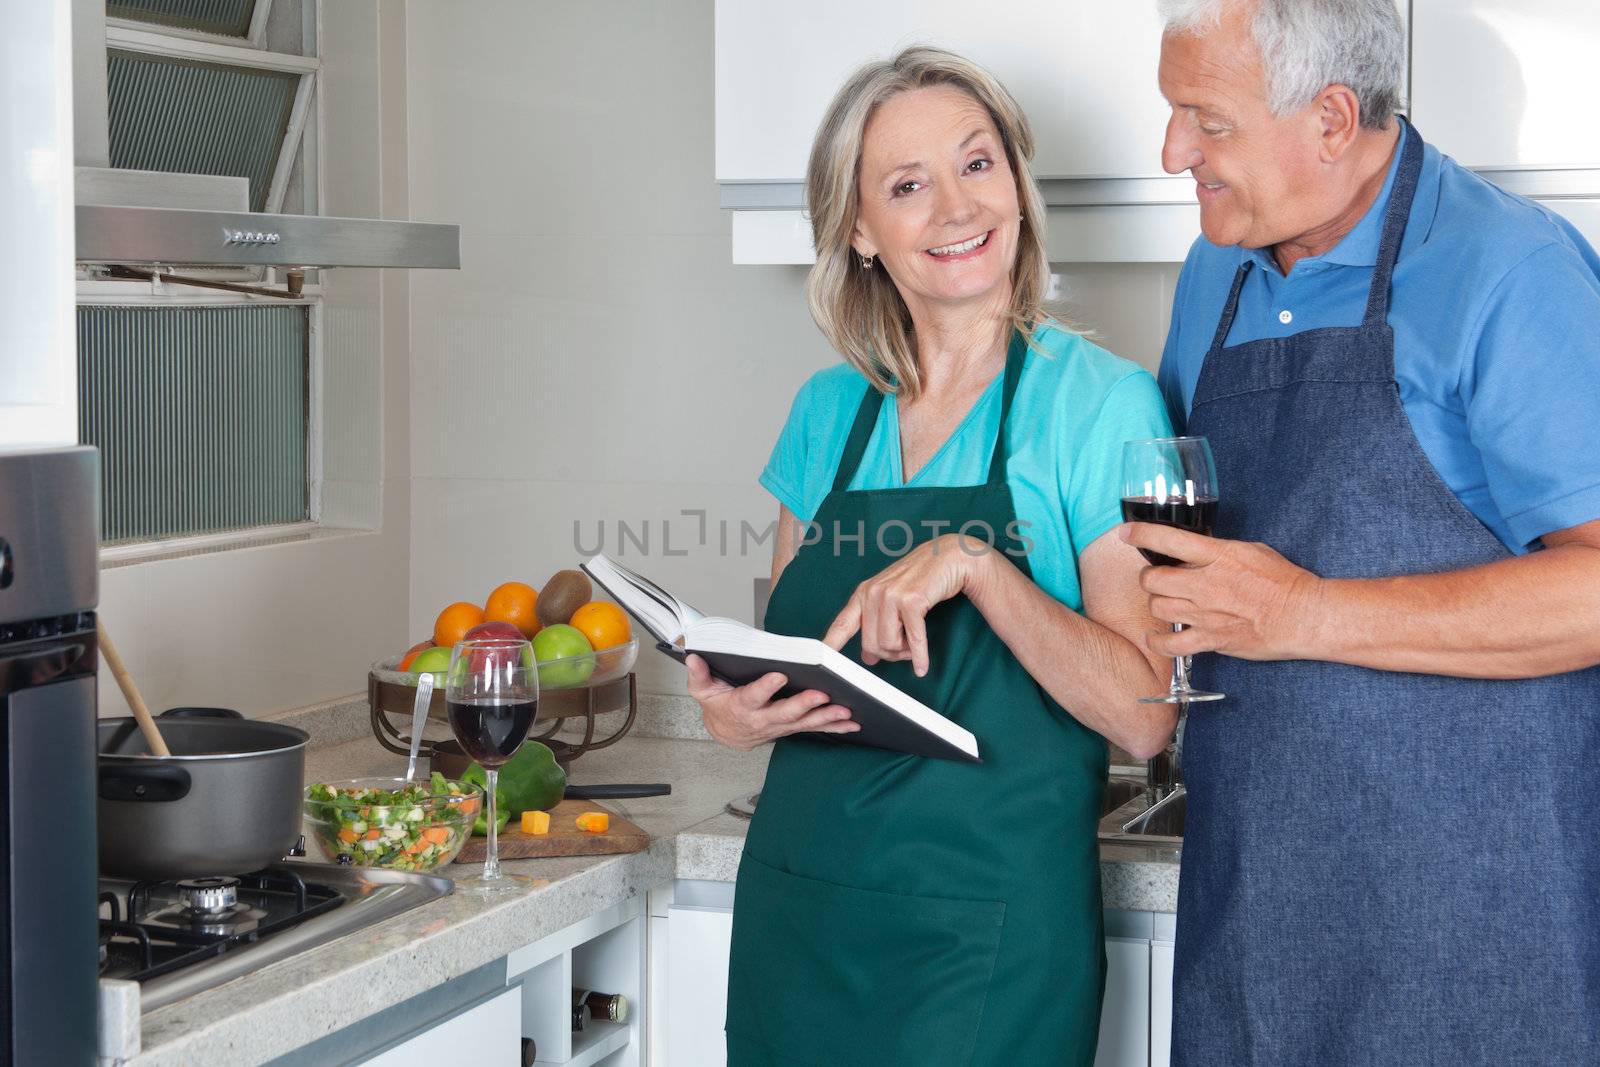 Portrait of smiling woman with recipe book and man holding wine glass in kitchen